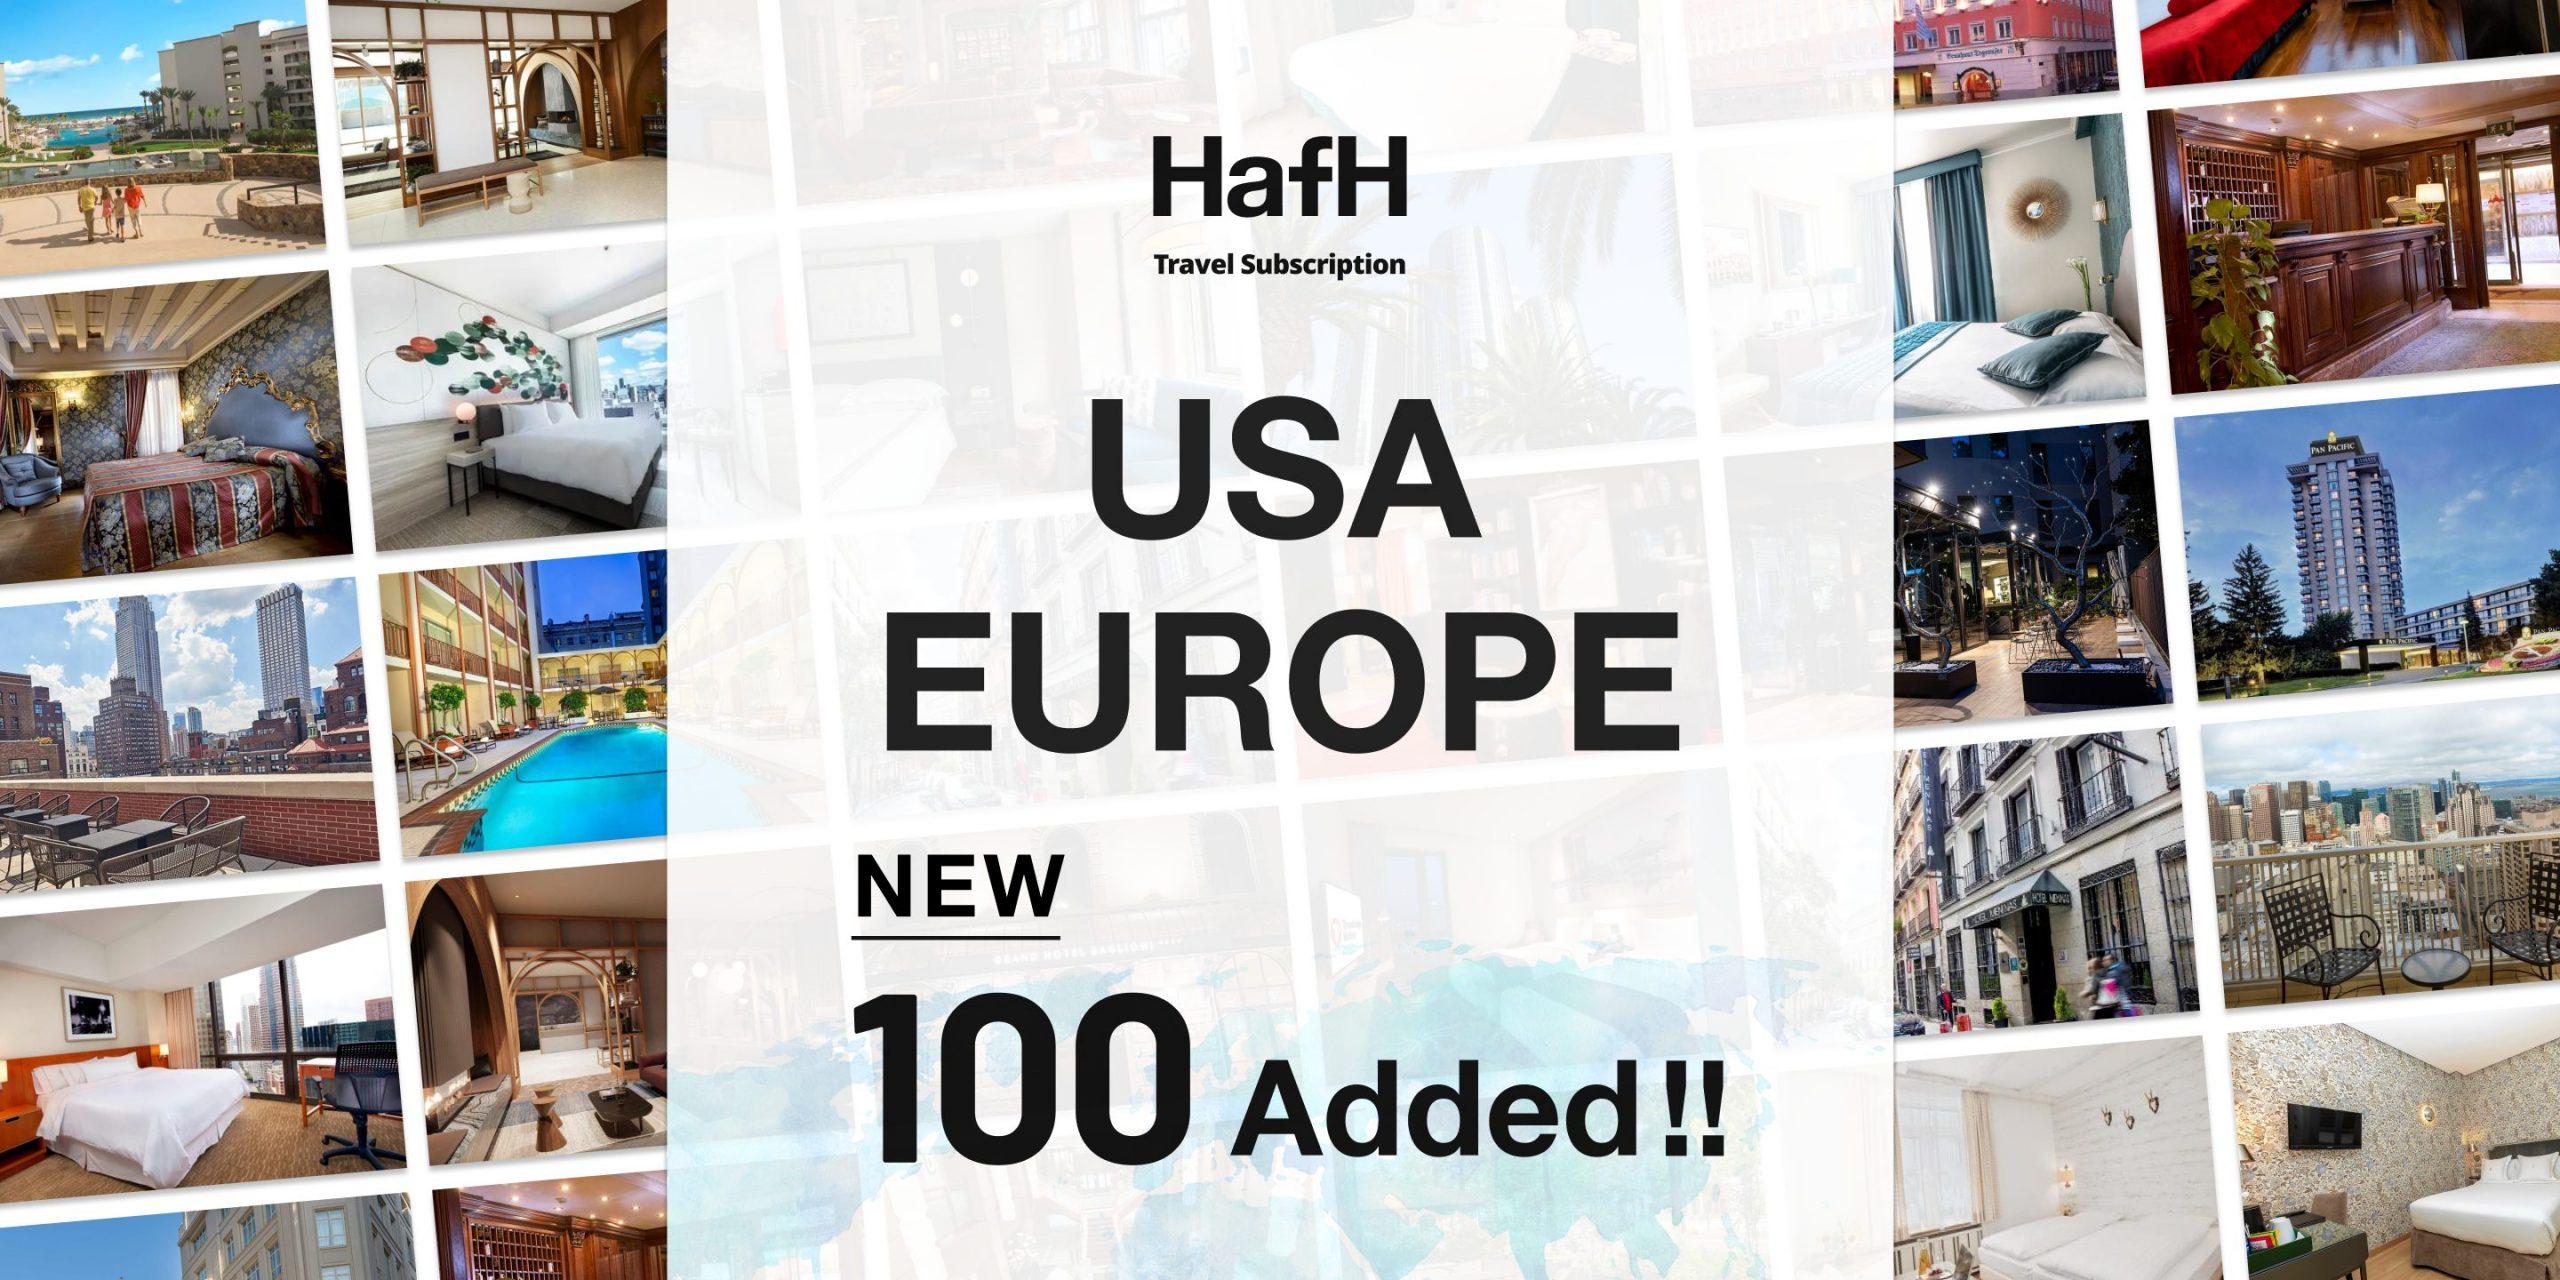 Enjoy affordable stays in the USA and Europe ! About 100 new hotels in popular tourist destinations added to Travel Subscription® HafH!